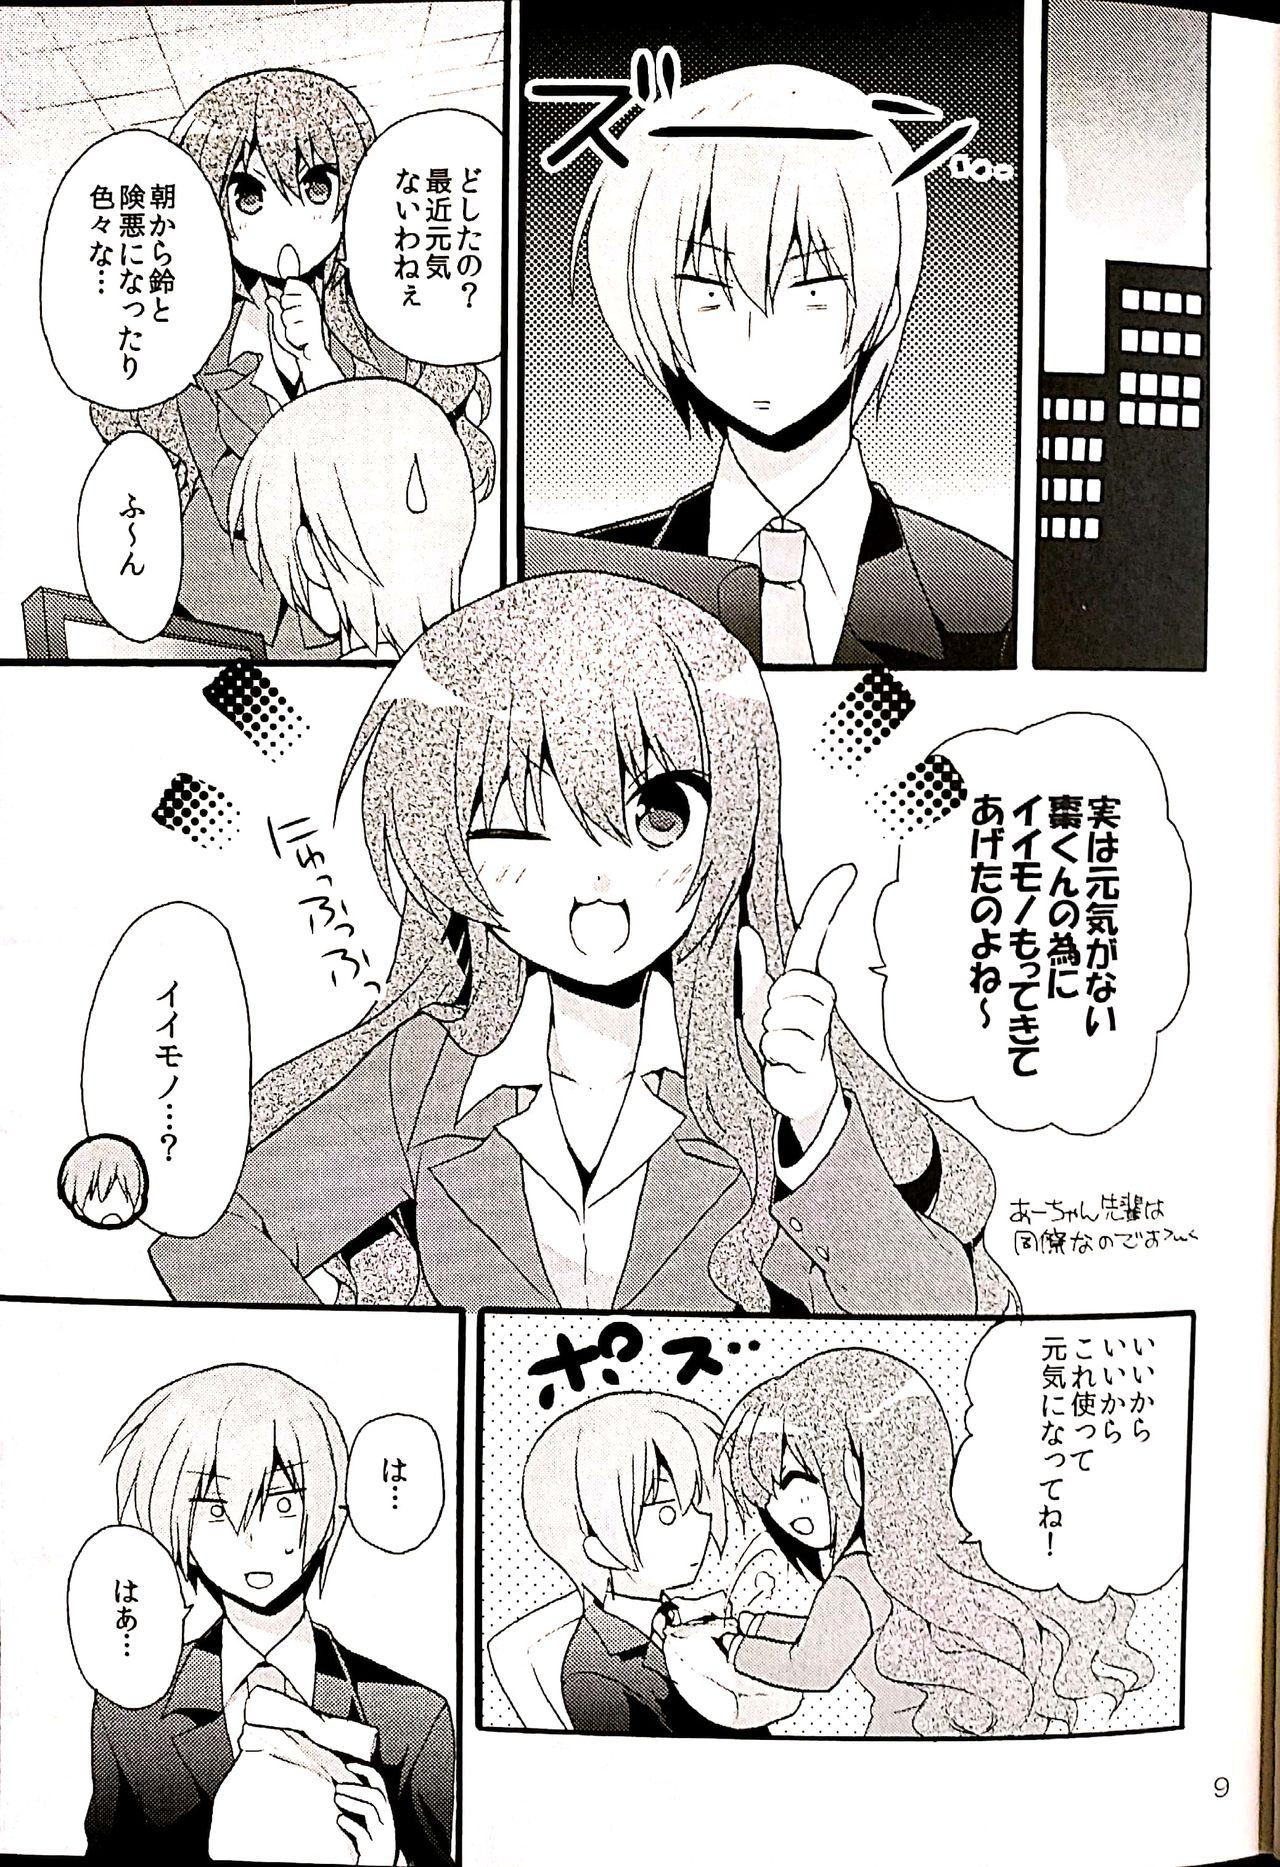 Oral Sex Sister Complex! - Little busters Couple Porn - Page 6